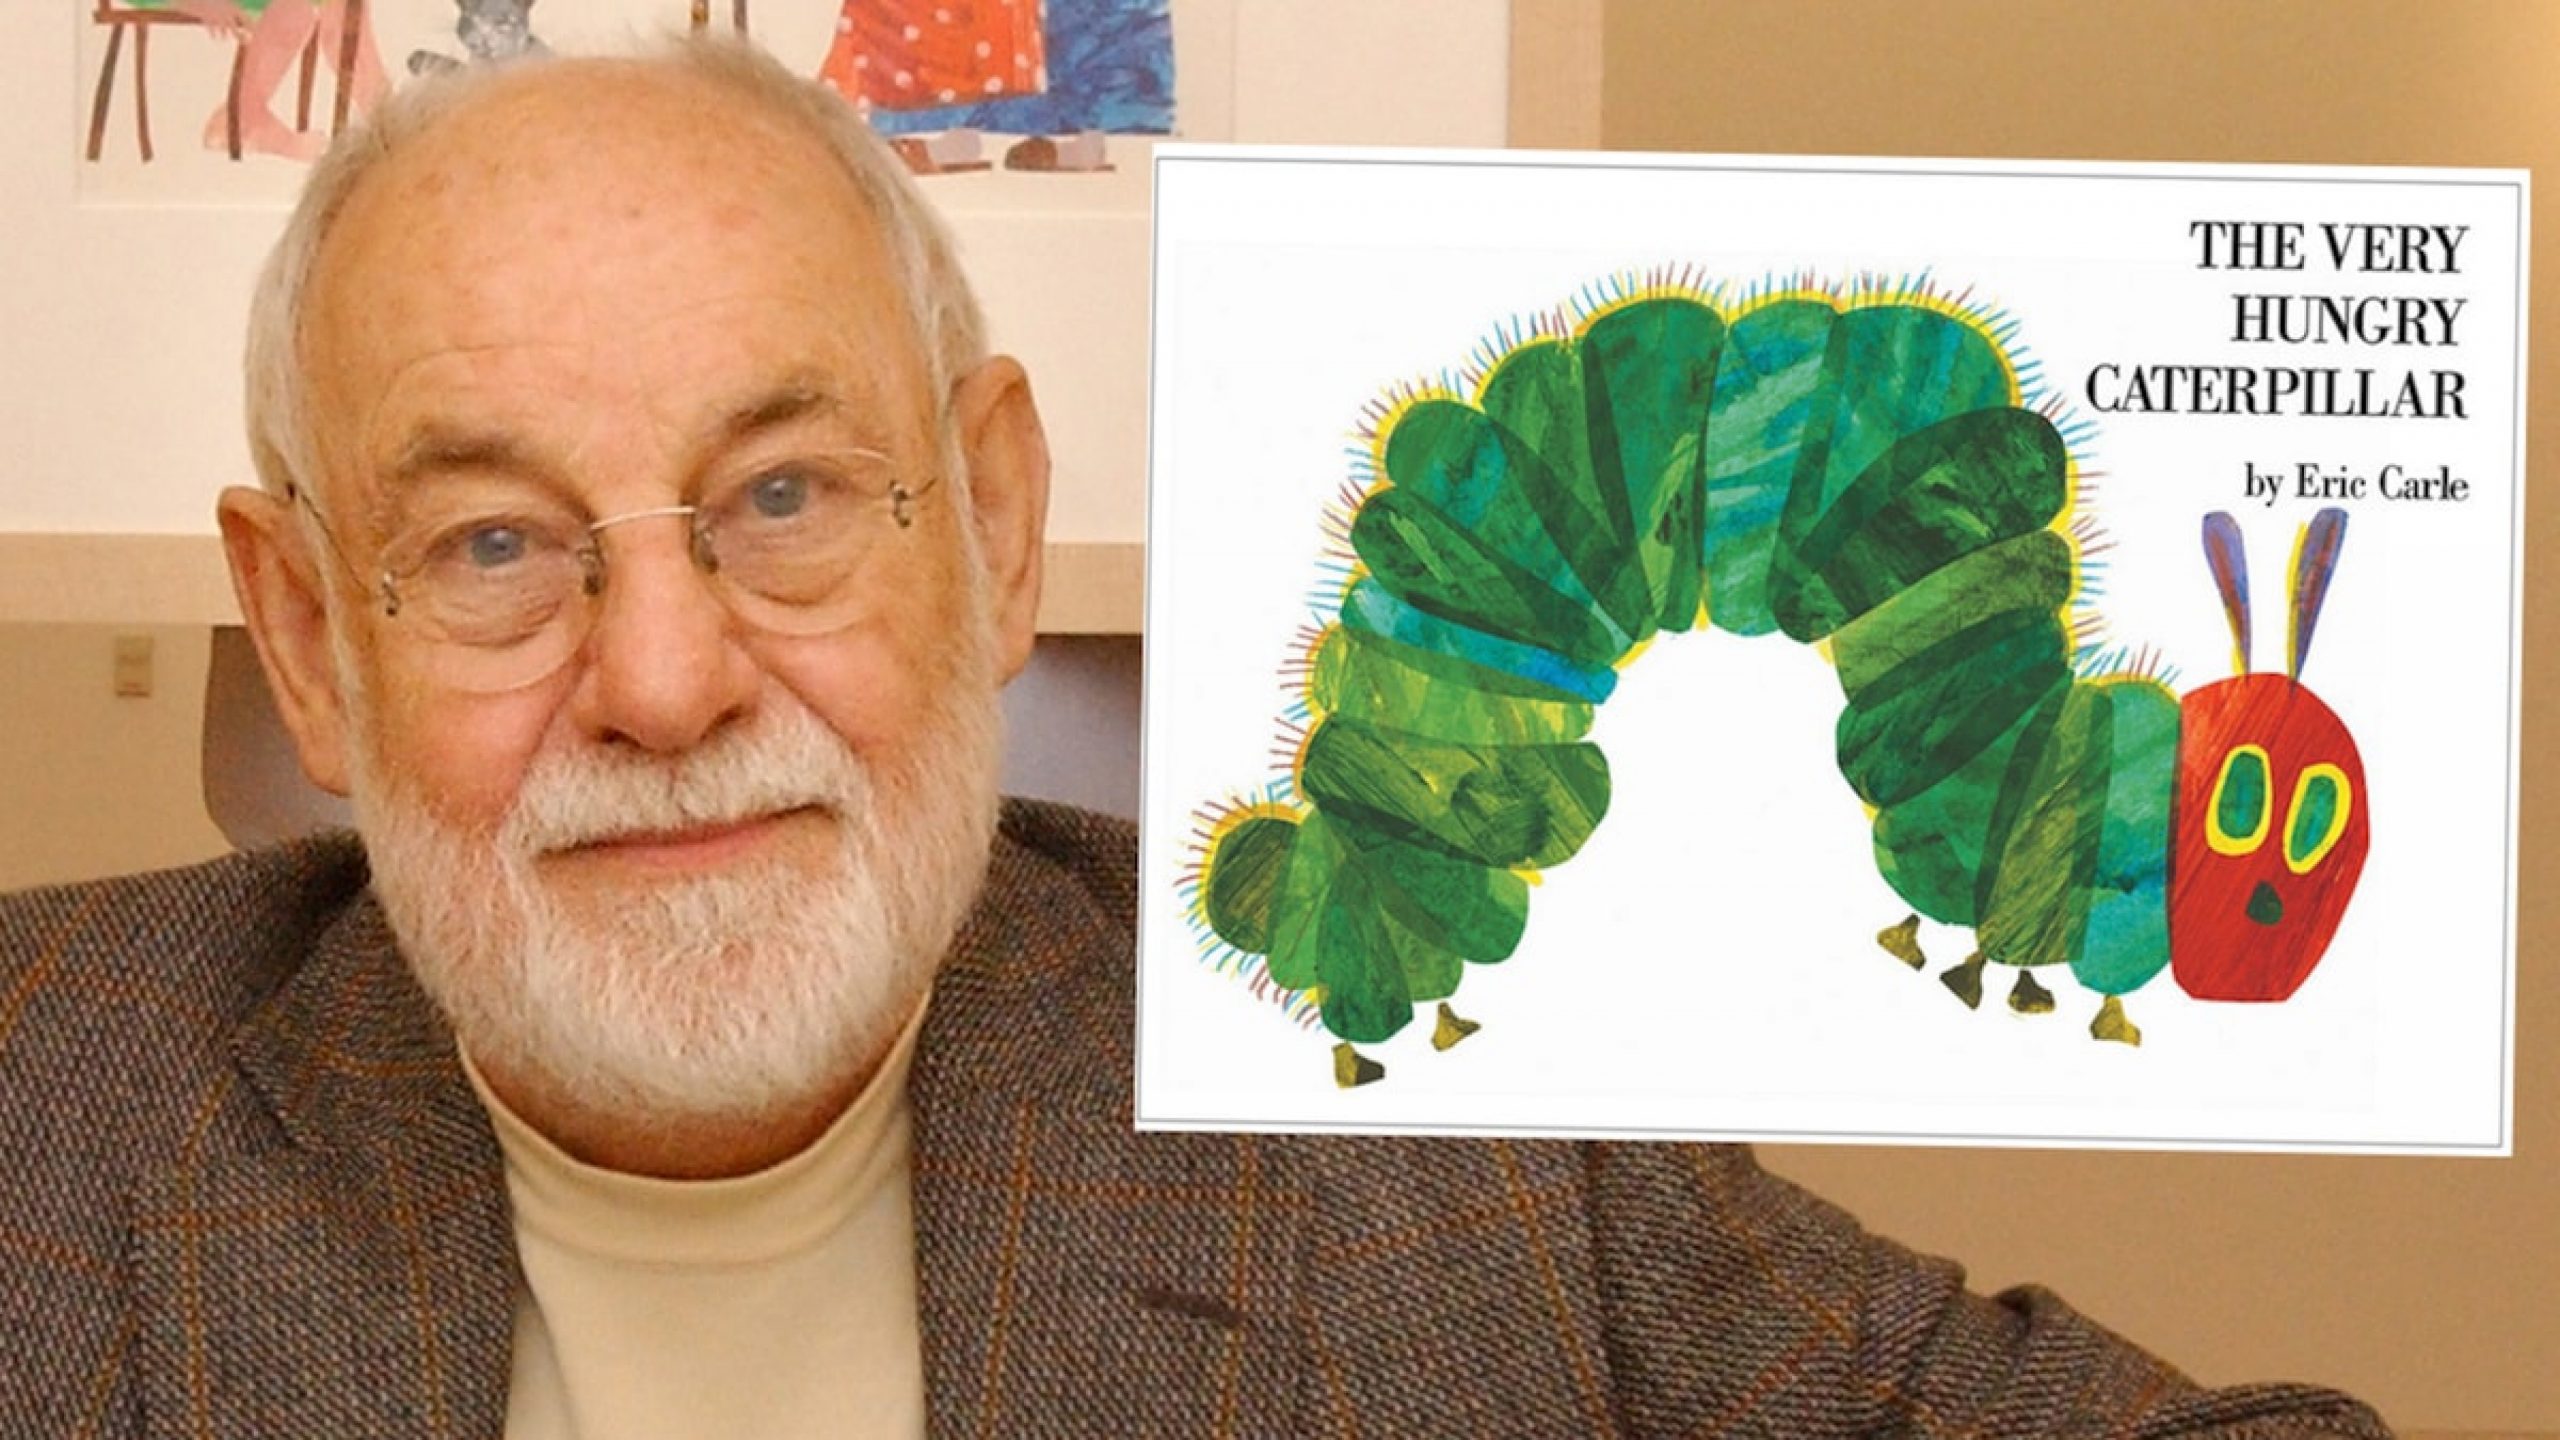 ‘The Very Hungry Caterpillar’ Author Eric Carle Dead at 91